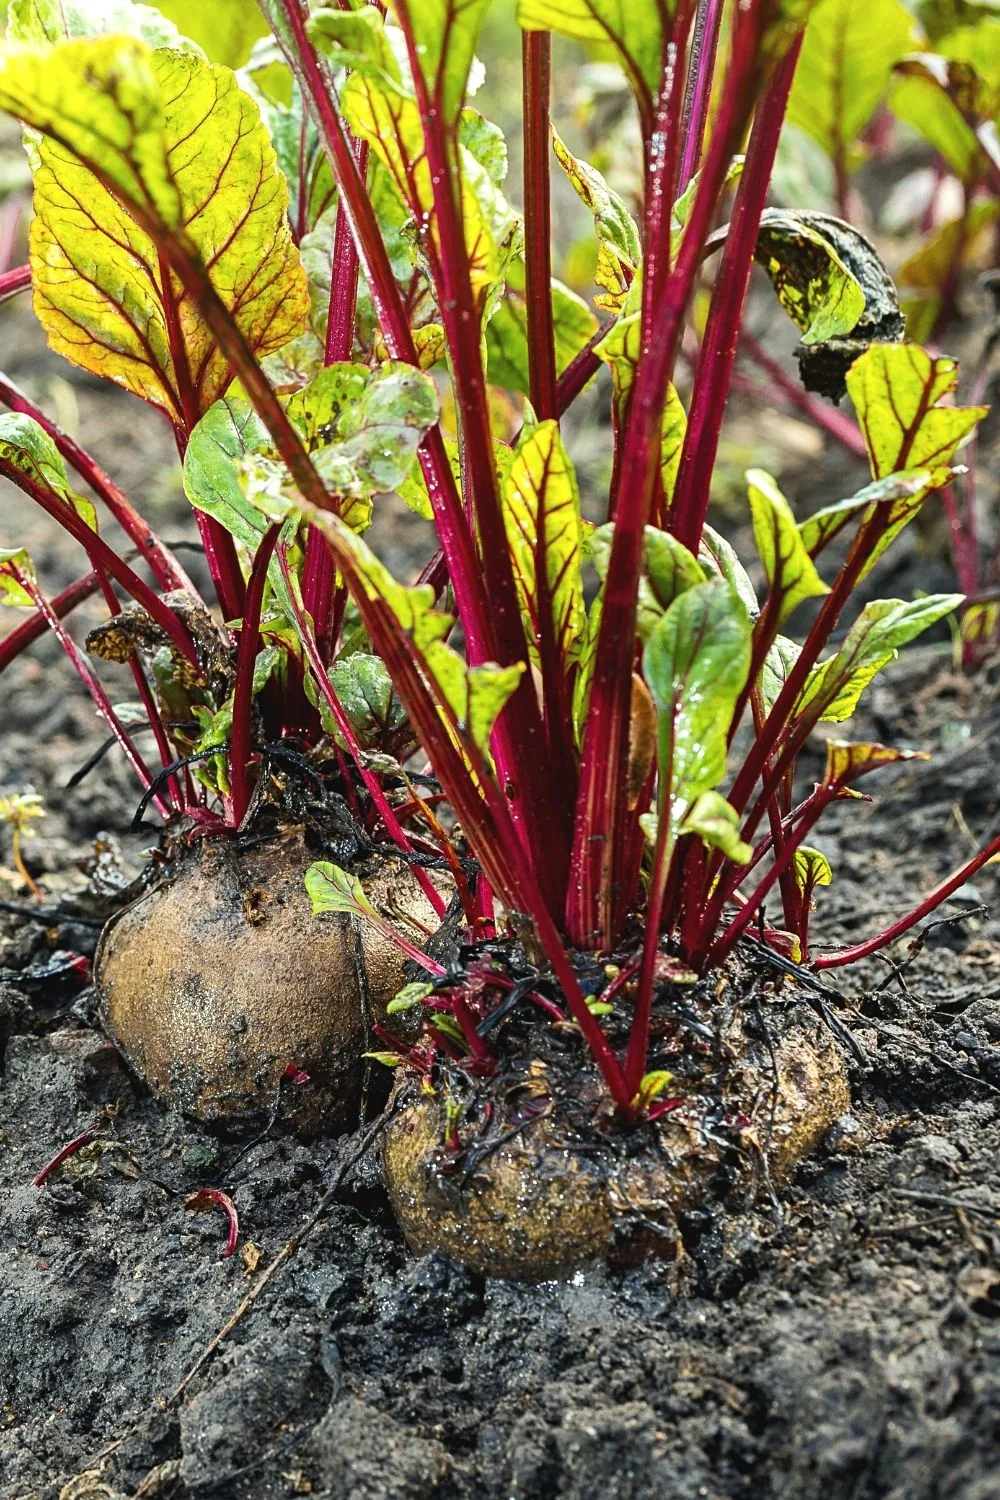 Beetroot is another healthy addition that you can grow on your raised garden beds